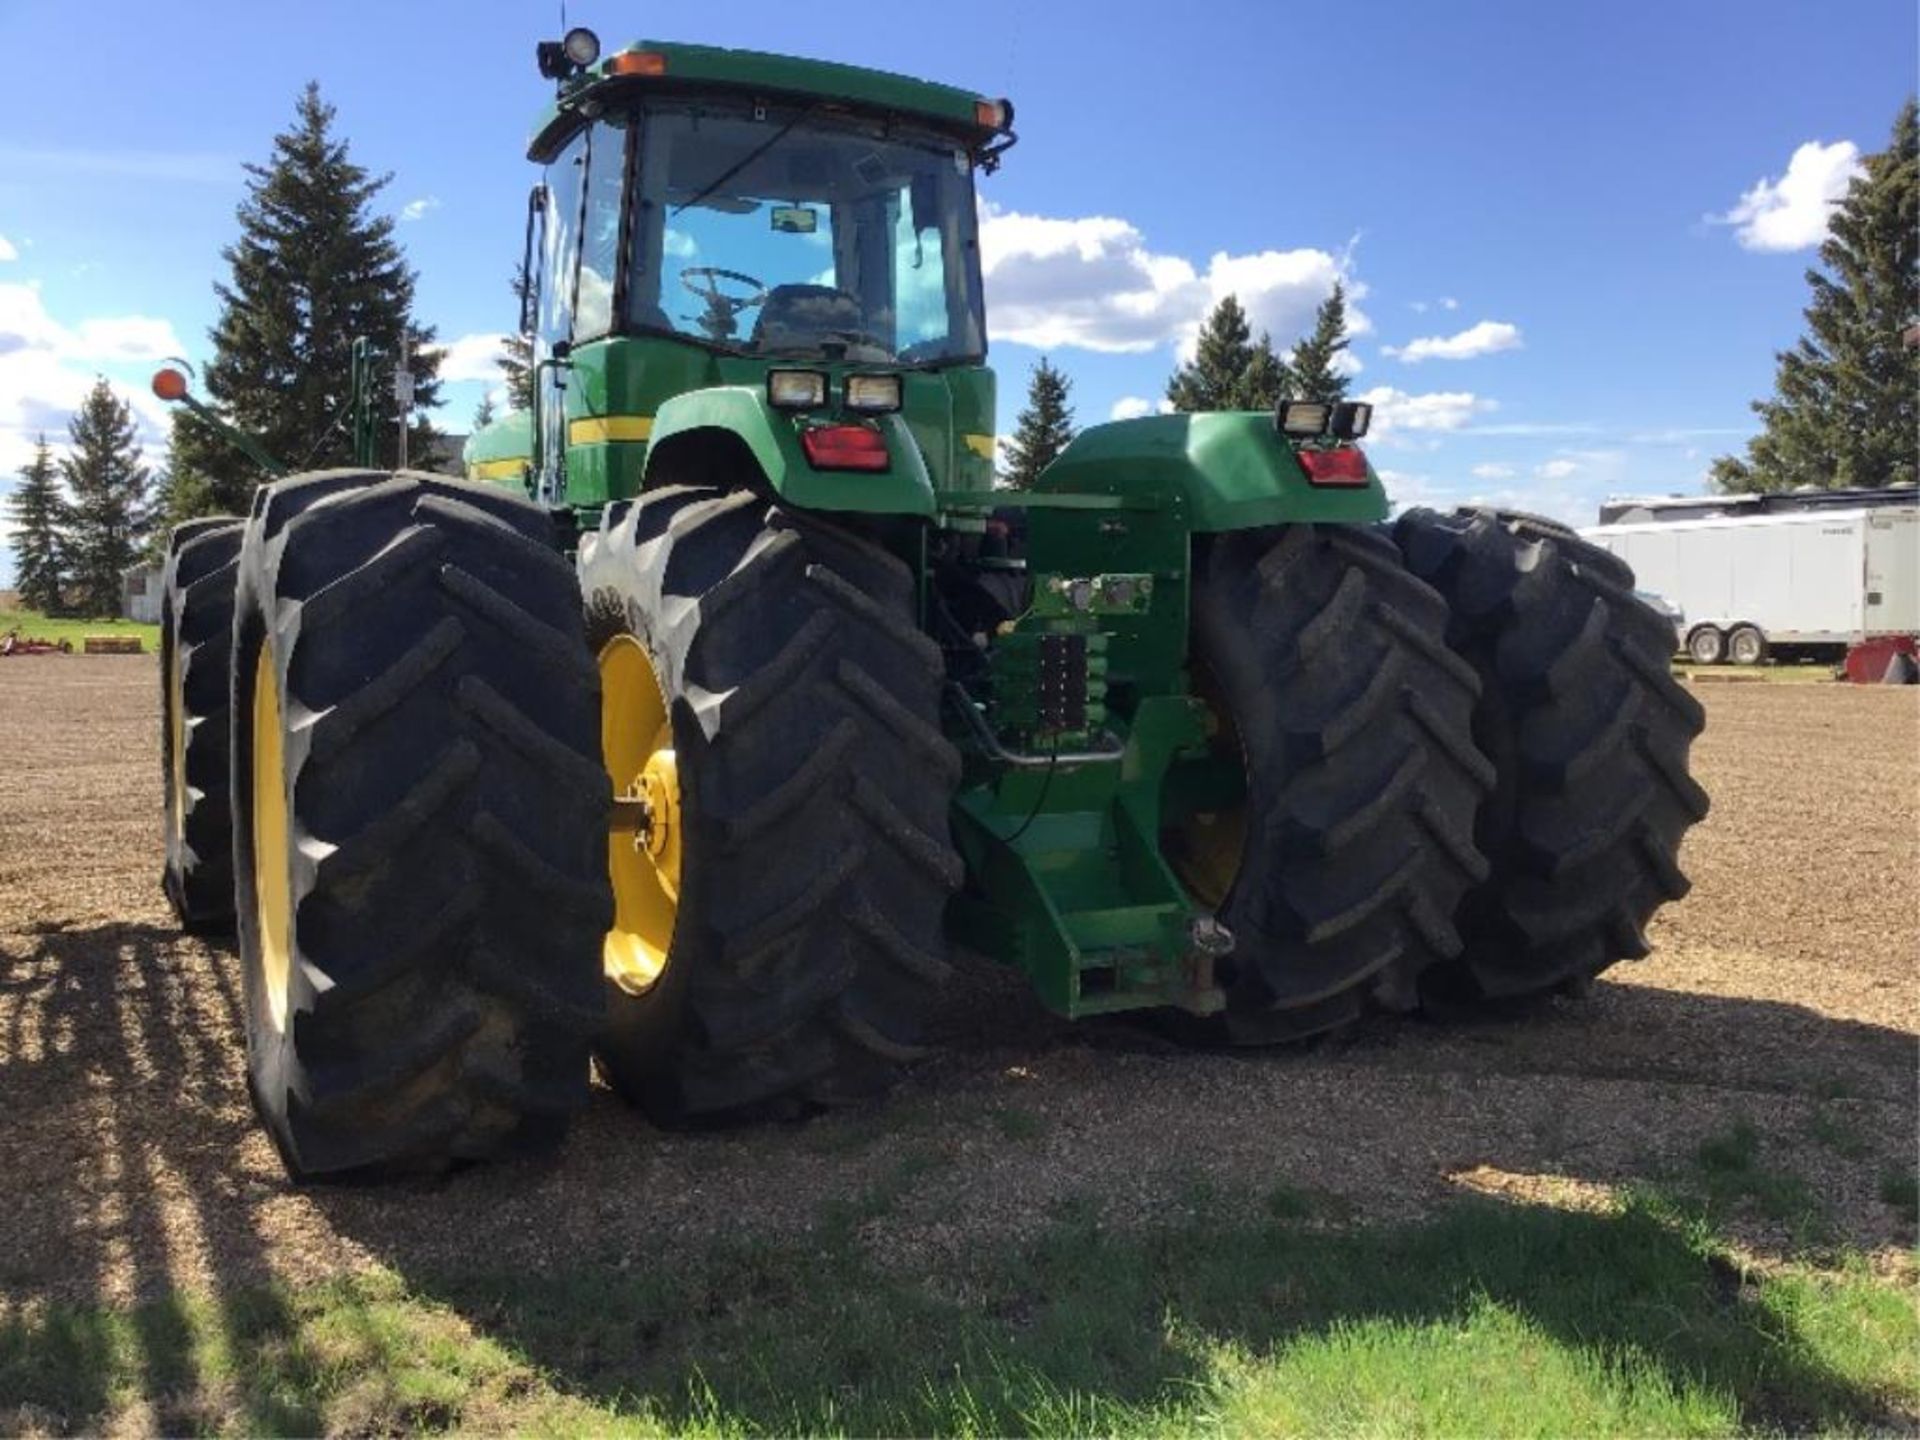 1997 John Deere 9300 4wd Tractor 710 70R/38 Duals, Rear Weights, 4-Hyd, 24 Spd Power Sync Trans, 699 - Image 6 of 26